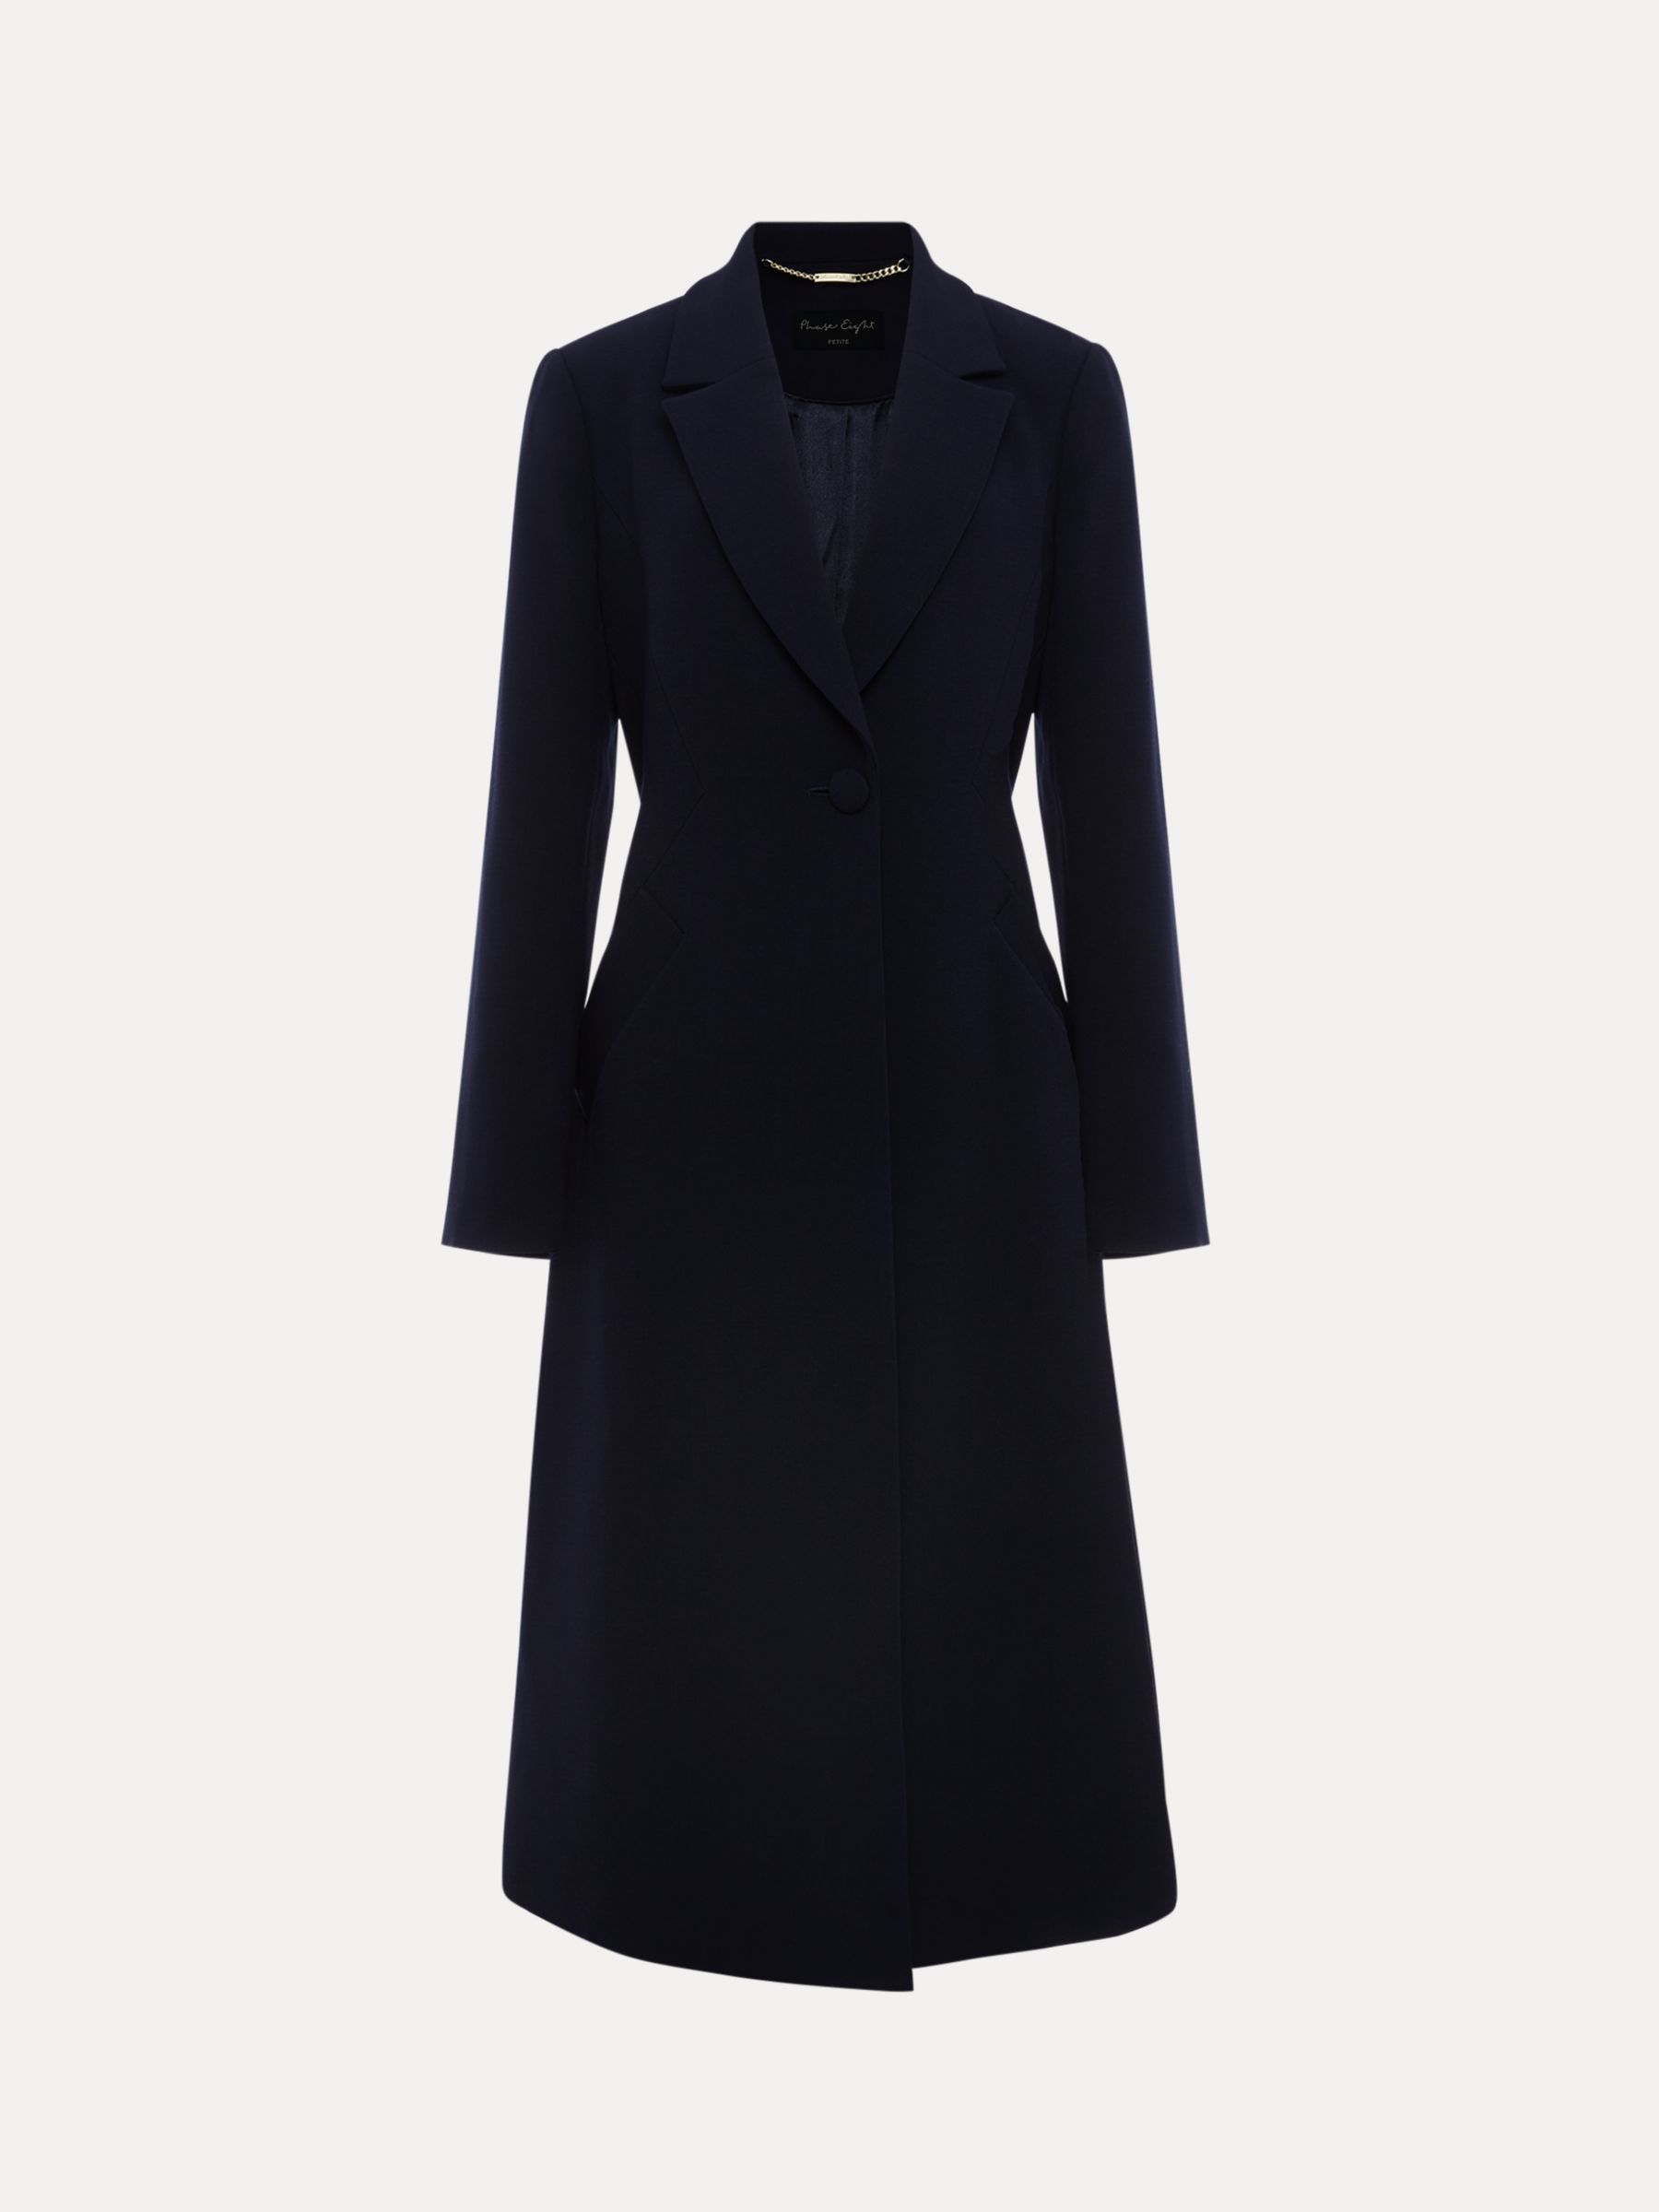 Phase Eight Petite Juliette Crepe Occasion Coat, Navy at John Lewis ...